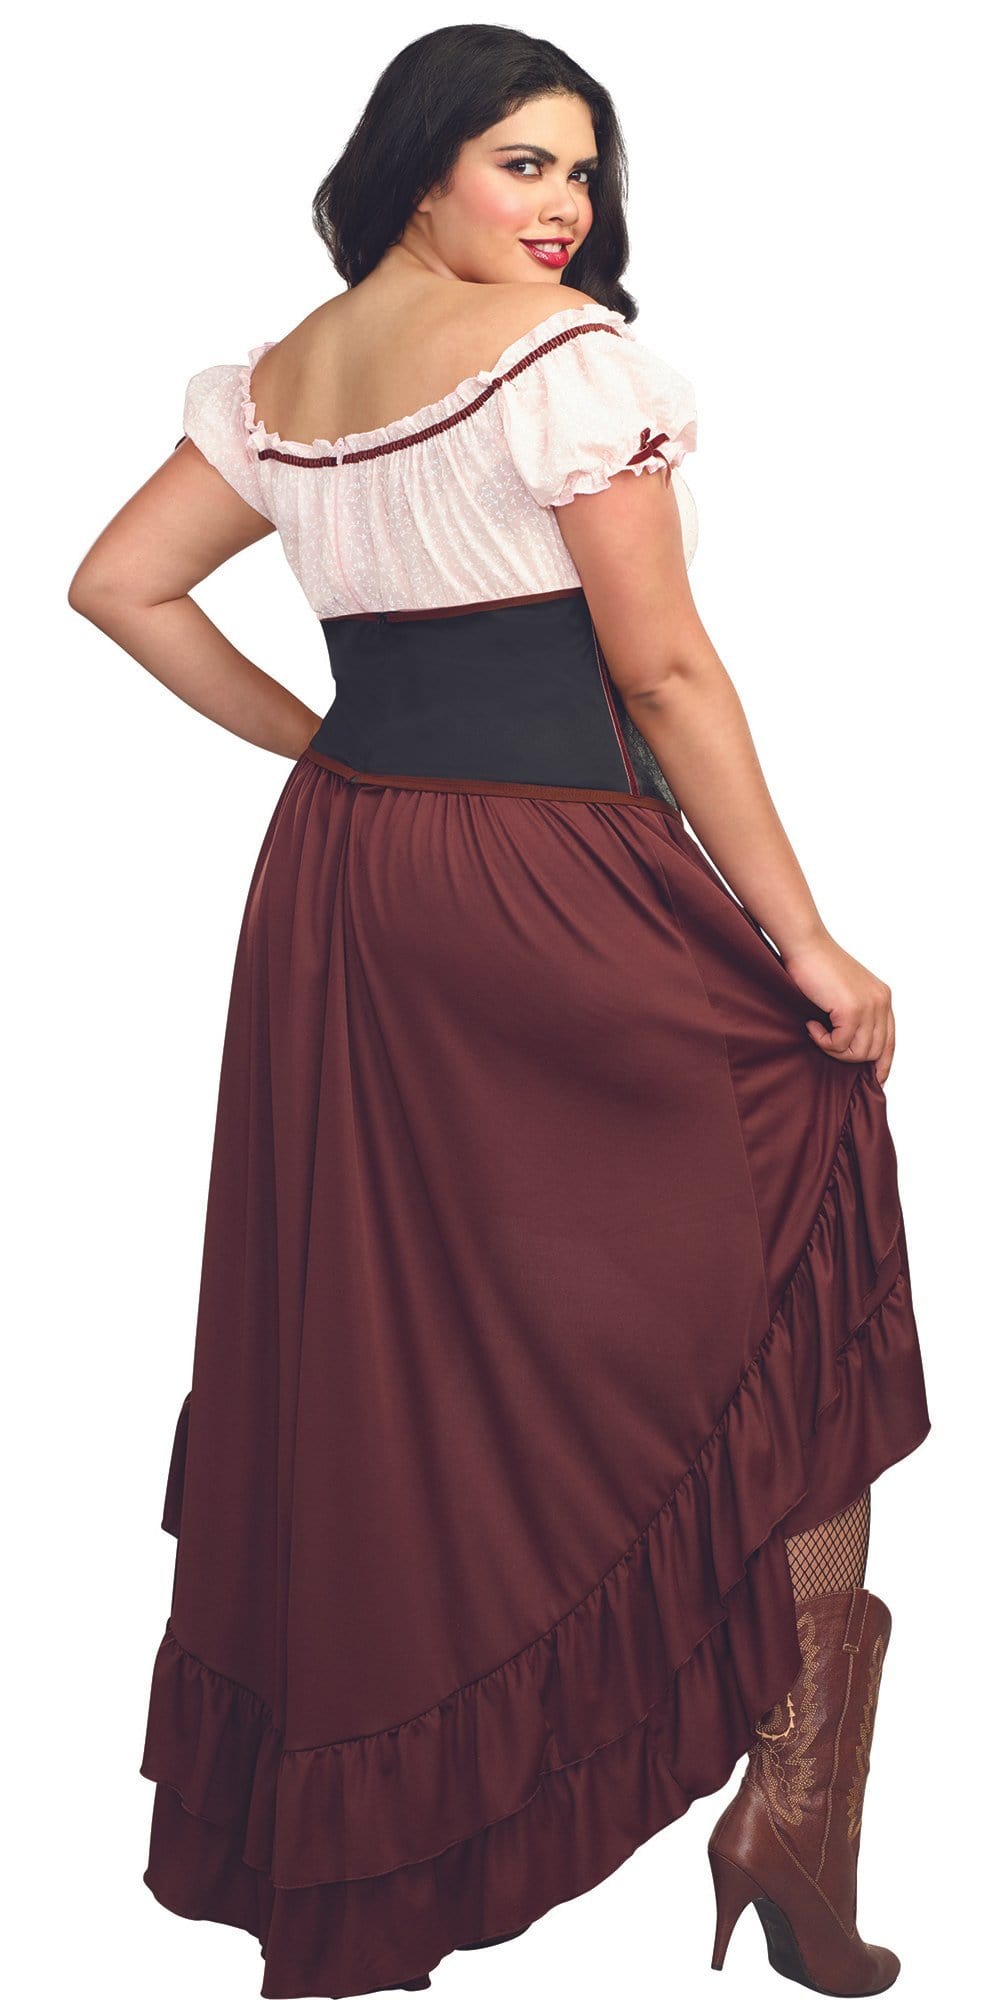 Sexy Plus Size Saloon Gal Wild West Women's Costume Musotica.com